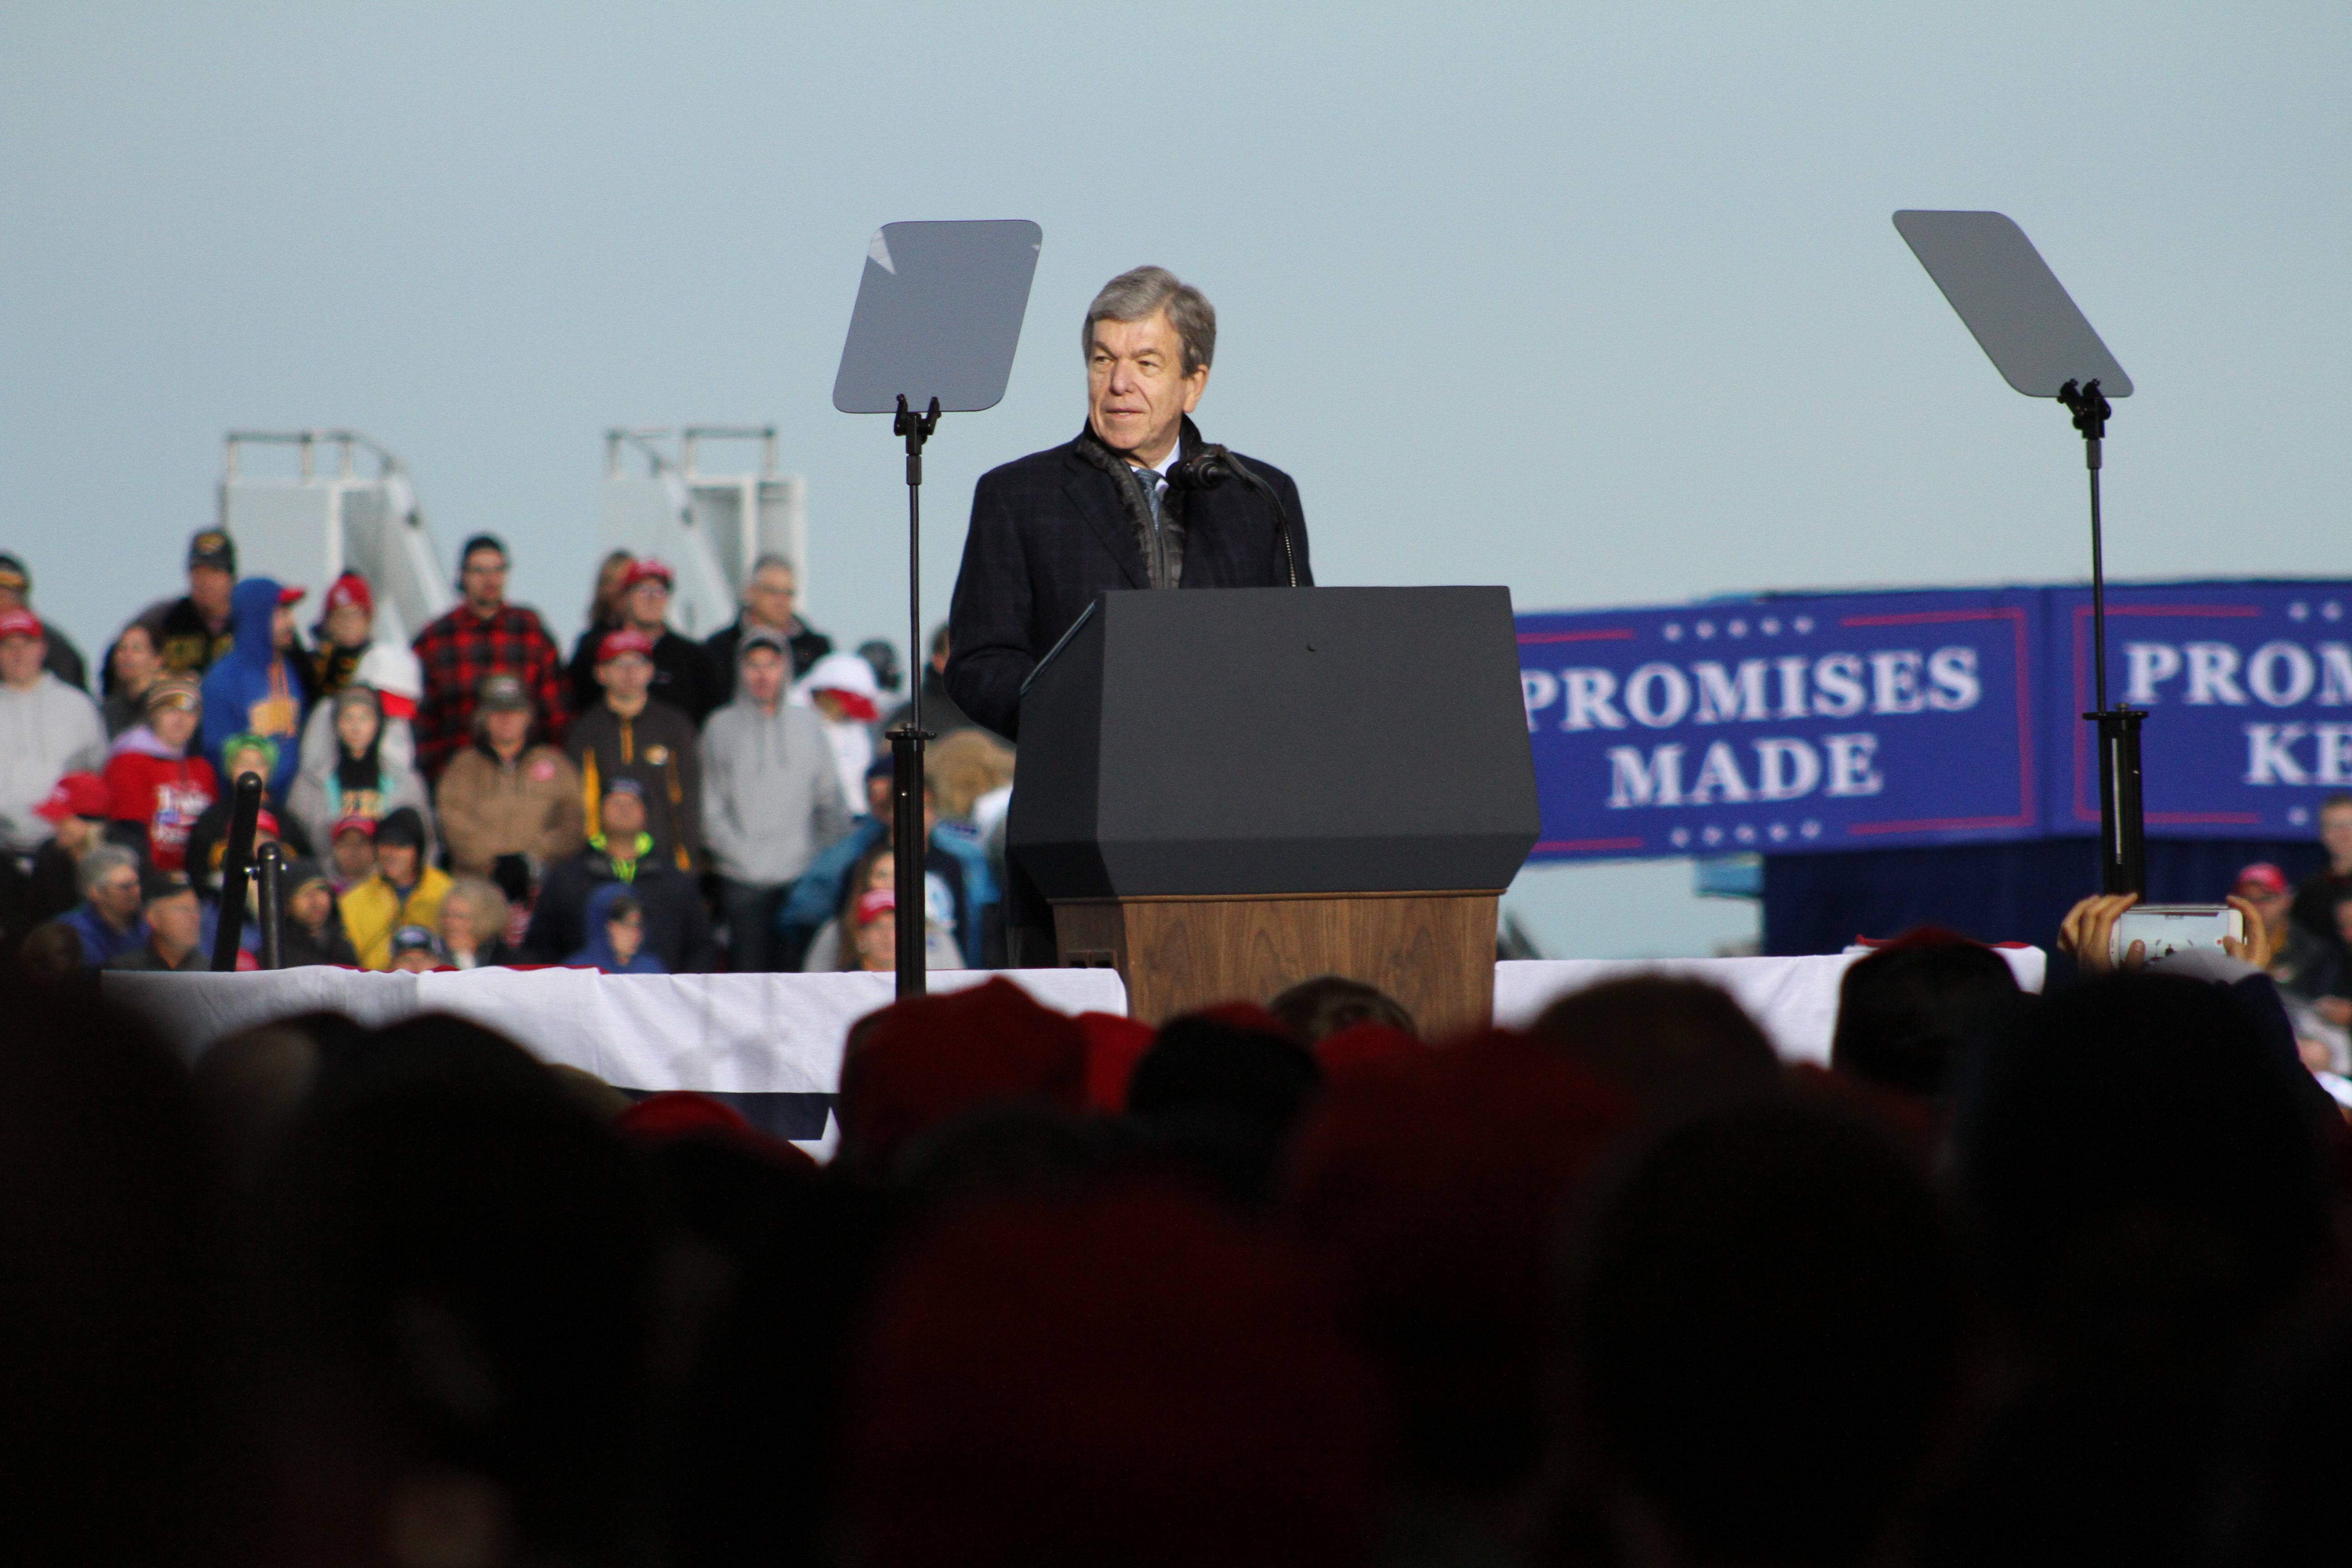 U.S. Sen. Roy Blunt speaks ahead of President Donal Trump's arrival at a campaign rally (ALISHA SHURR/THE MISSOURI TIMES.)